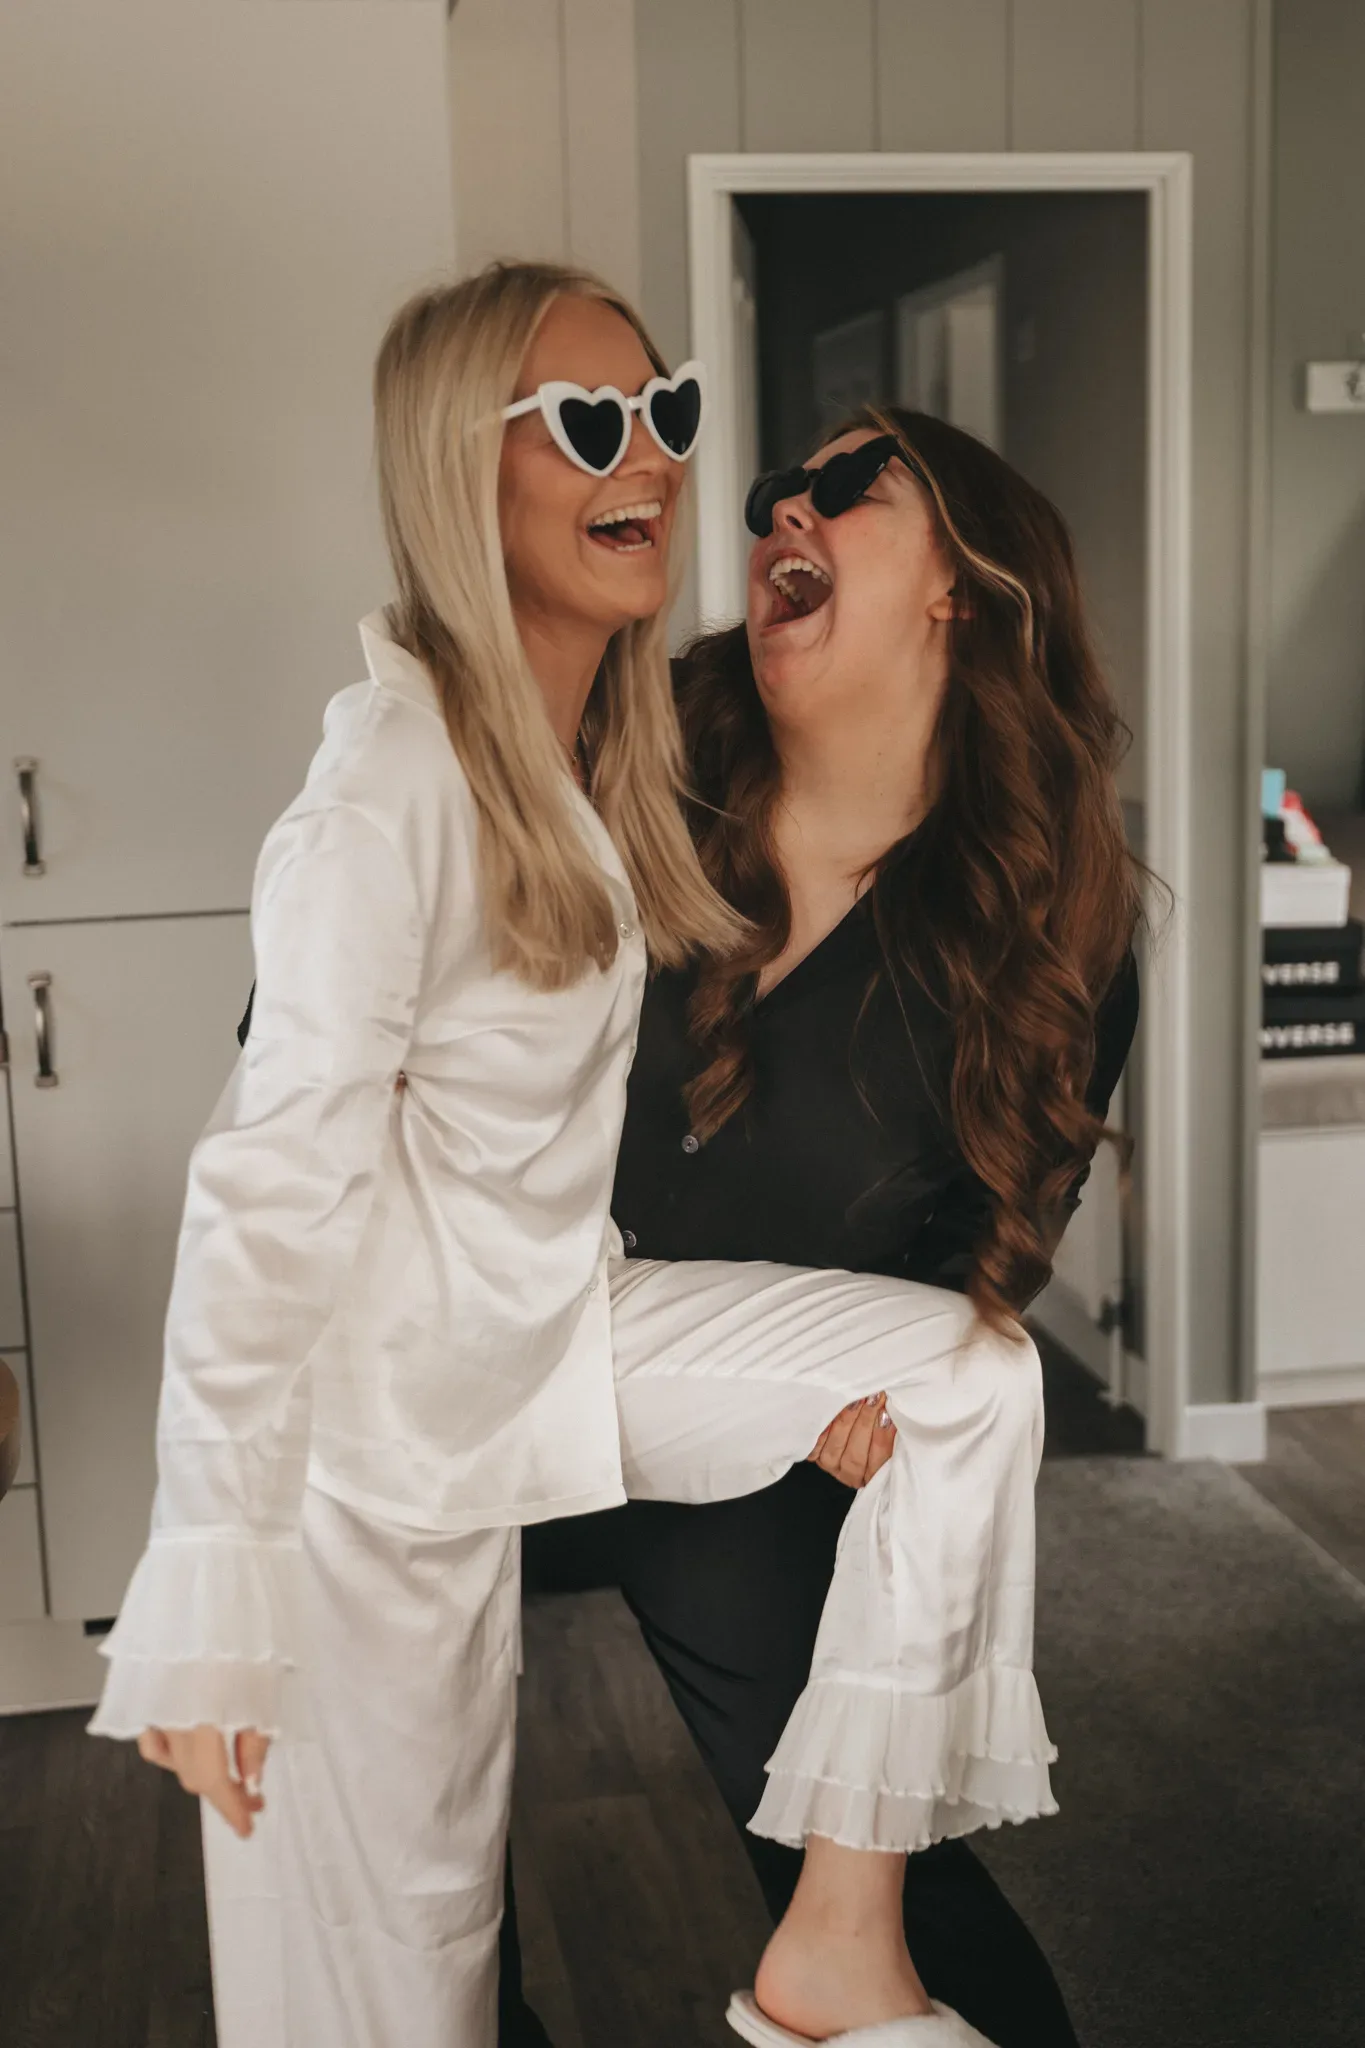 Two women laughing joyfully, one in a white suit lifting the other, who wears a black top and jeans. the woman being lifted wears heart-shaped sunglasses. they are indoors with a modern decor.